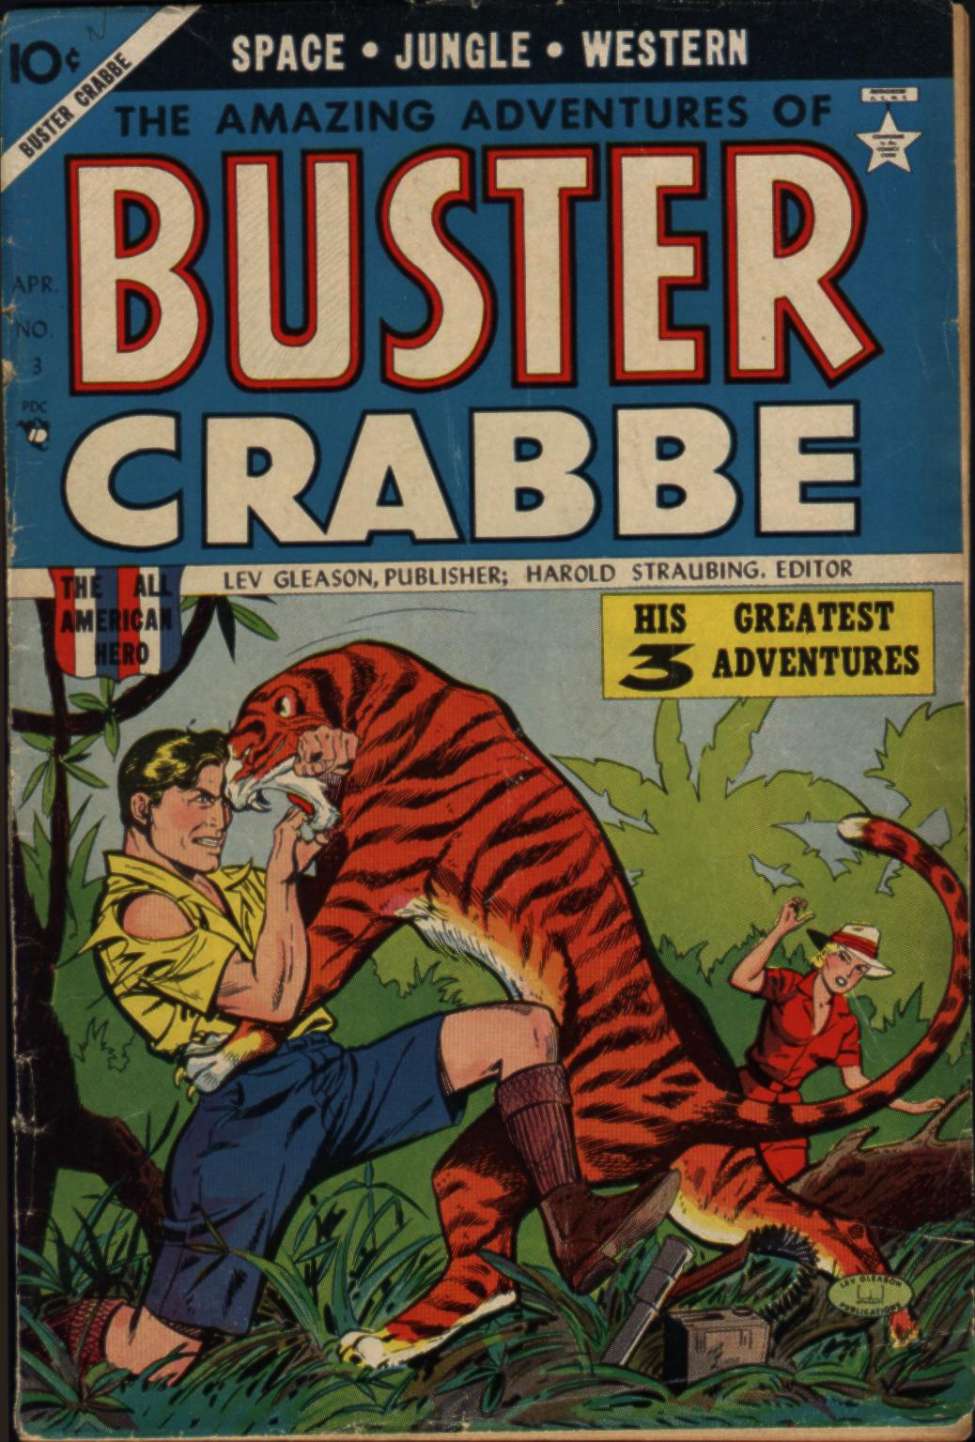 Comic Book Cover For The Amazing Adventures of Buster Crabbe 3